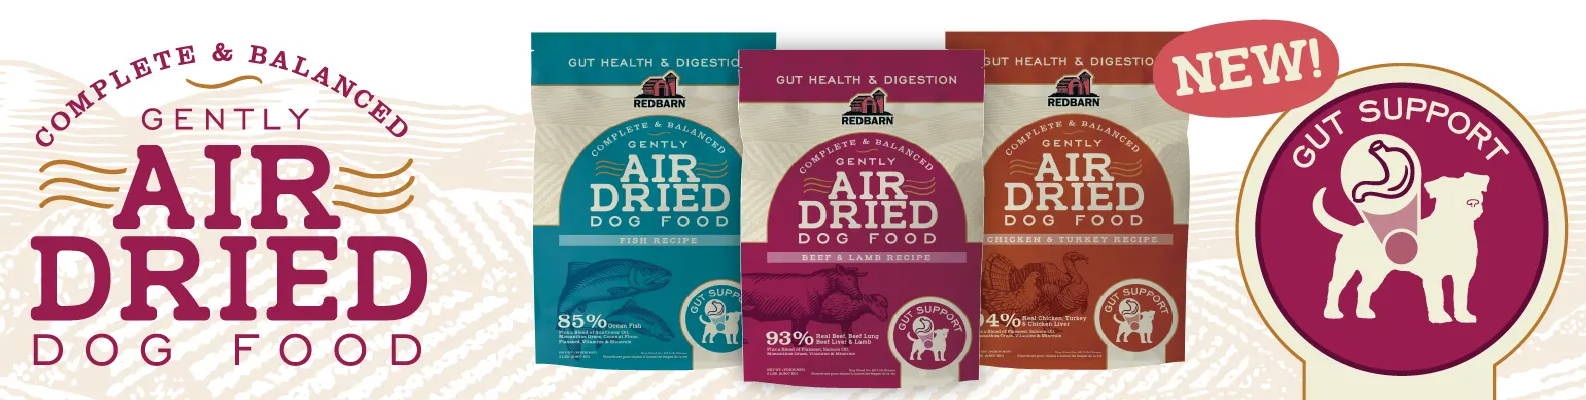 Photo of three bags of Air Dried Dog food with text: Gently Air Dried Dog Food, with a Gut Support image